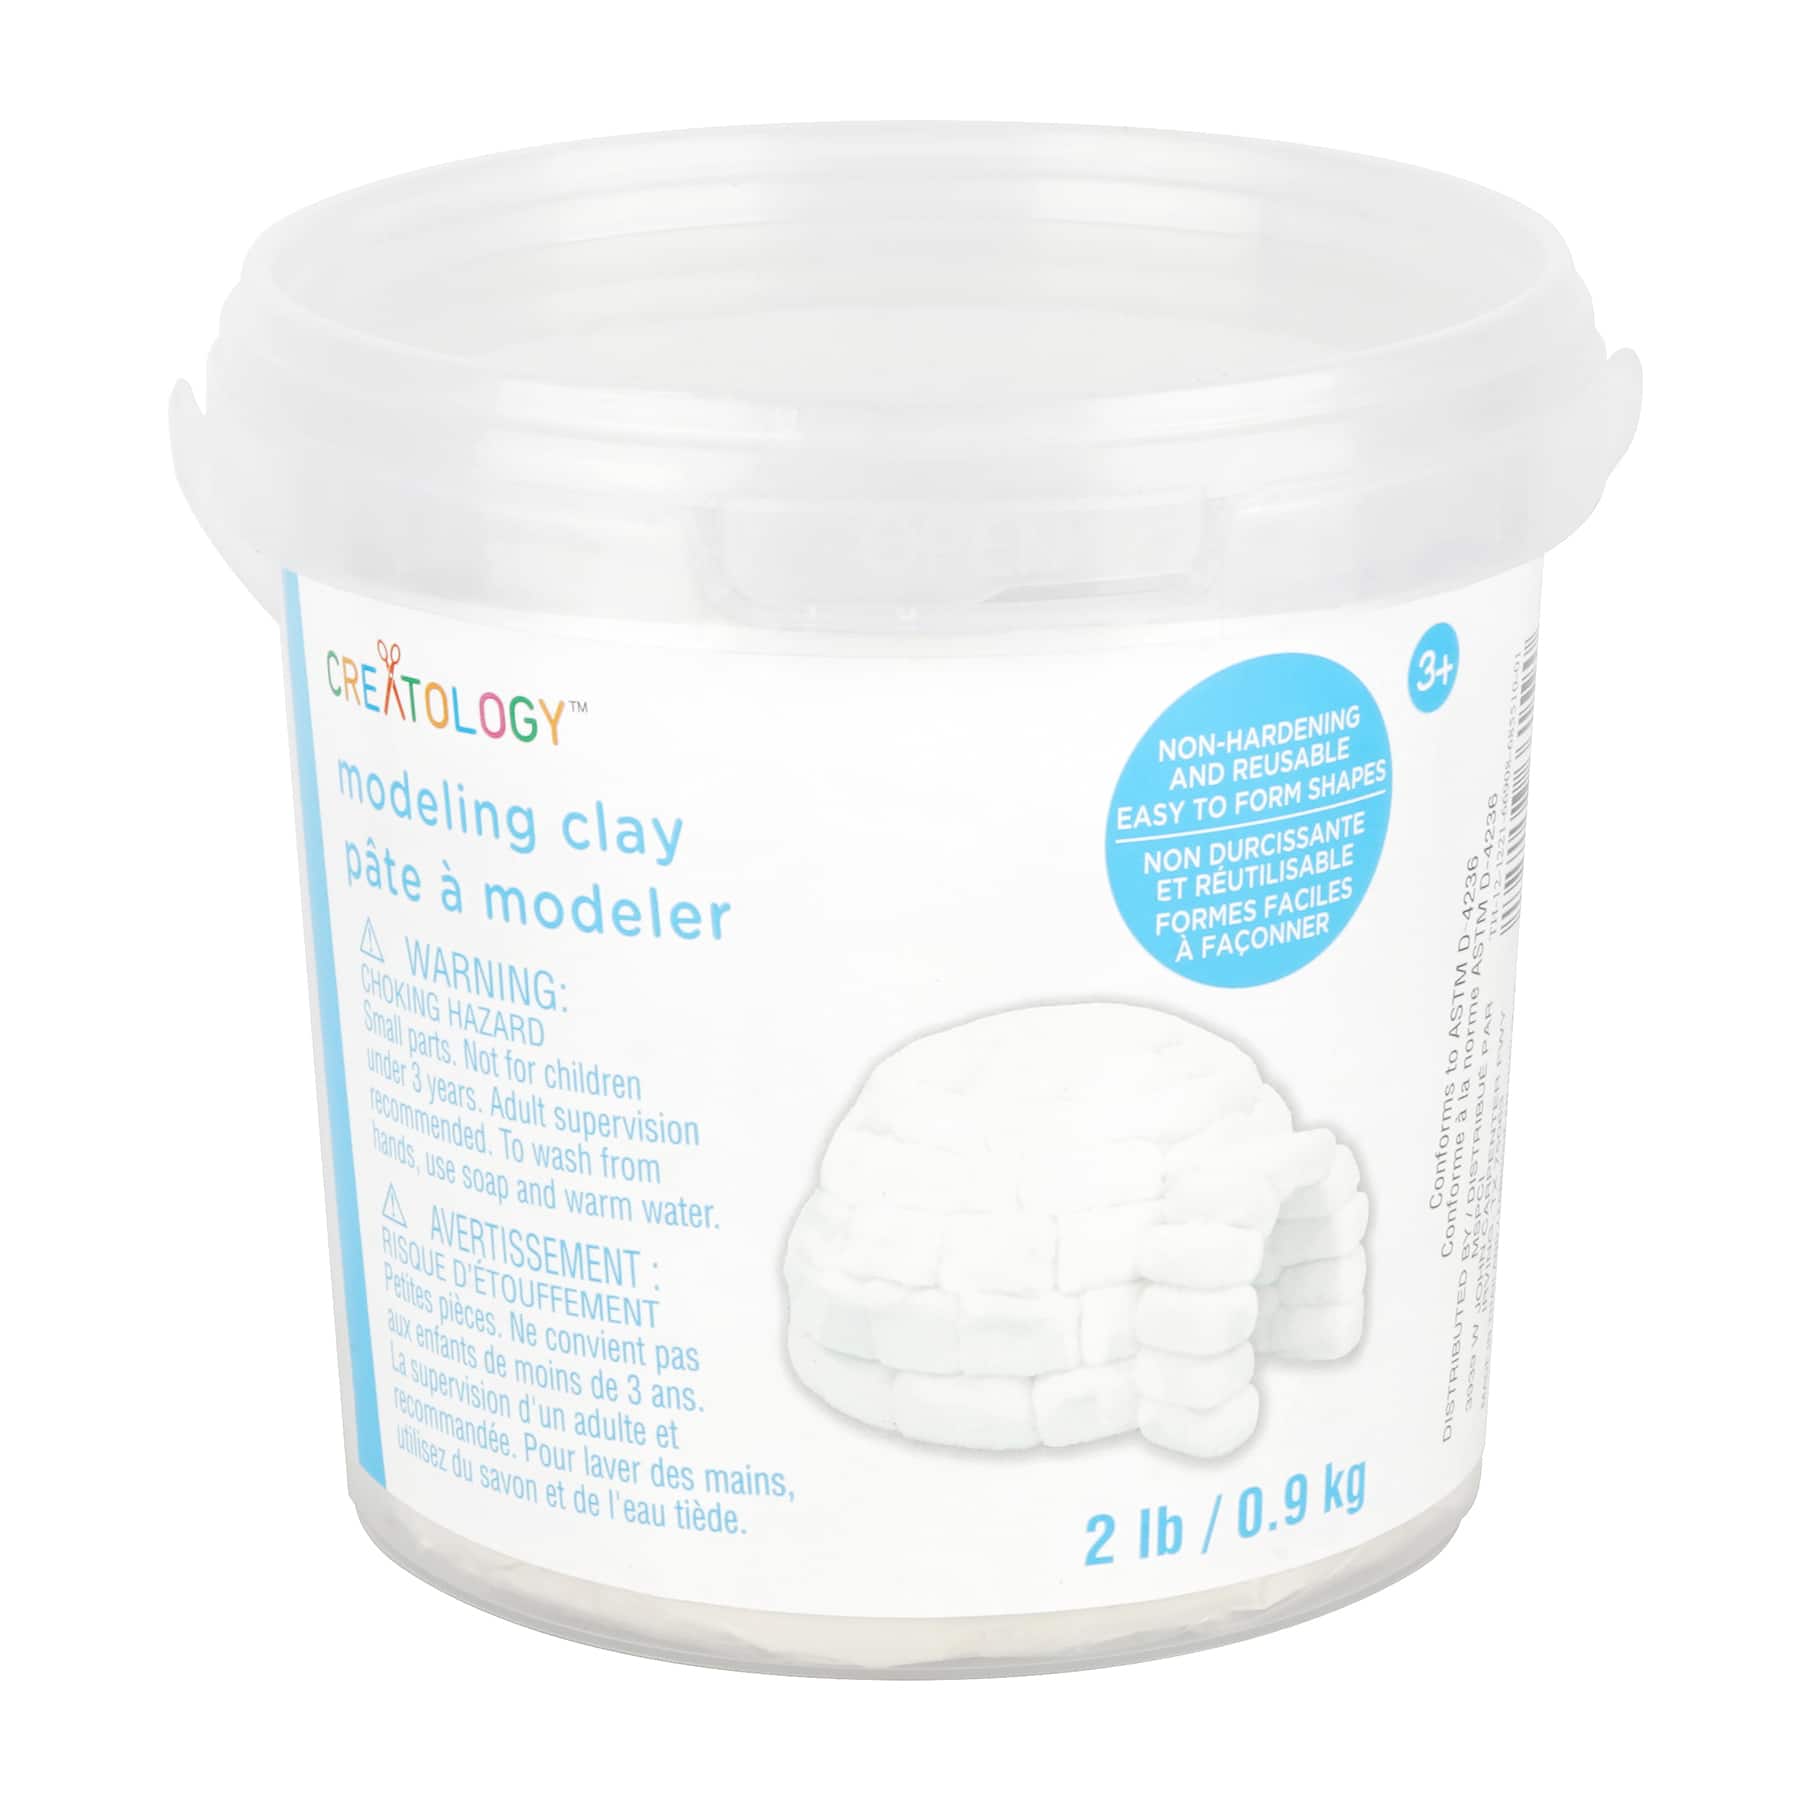 2lb. White Modeling Clay by Creatology™